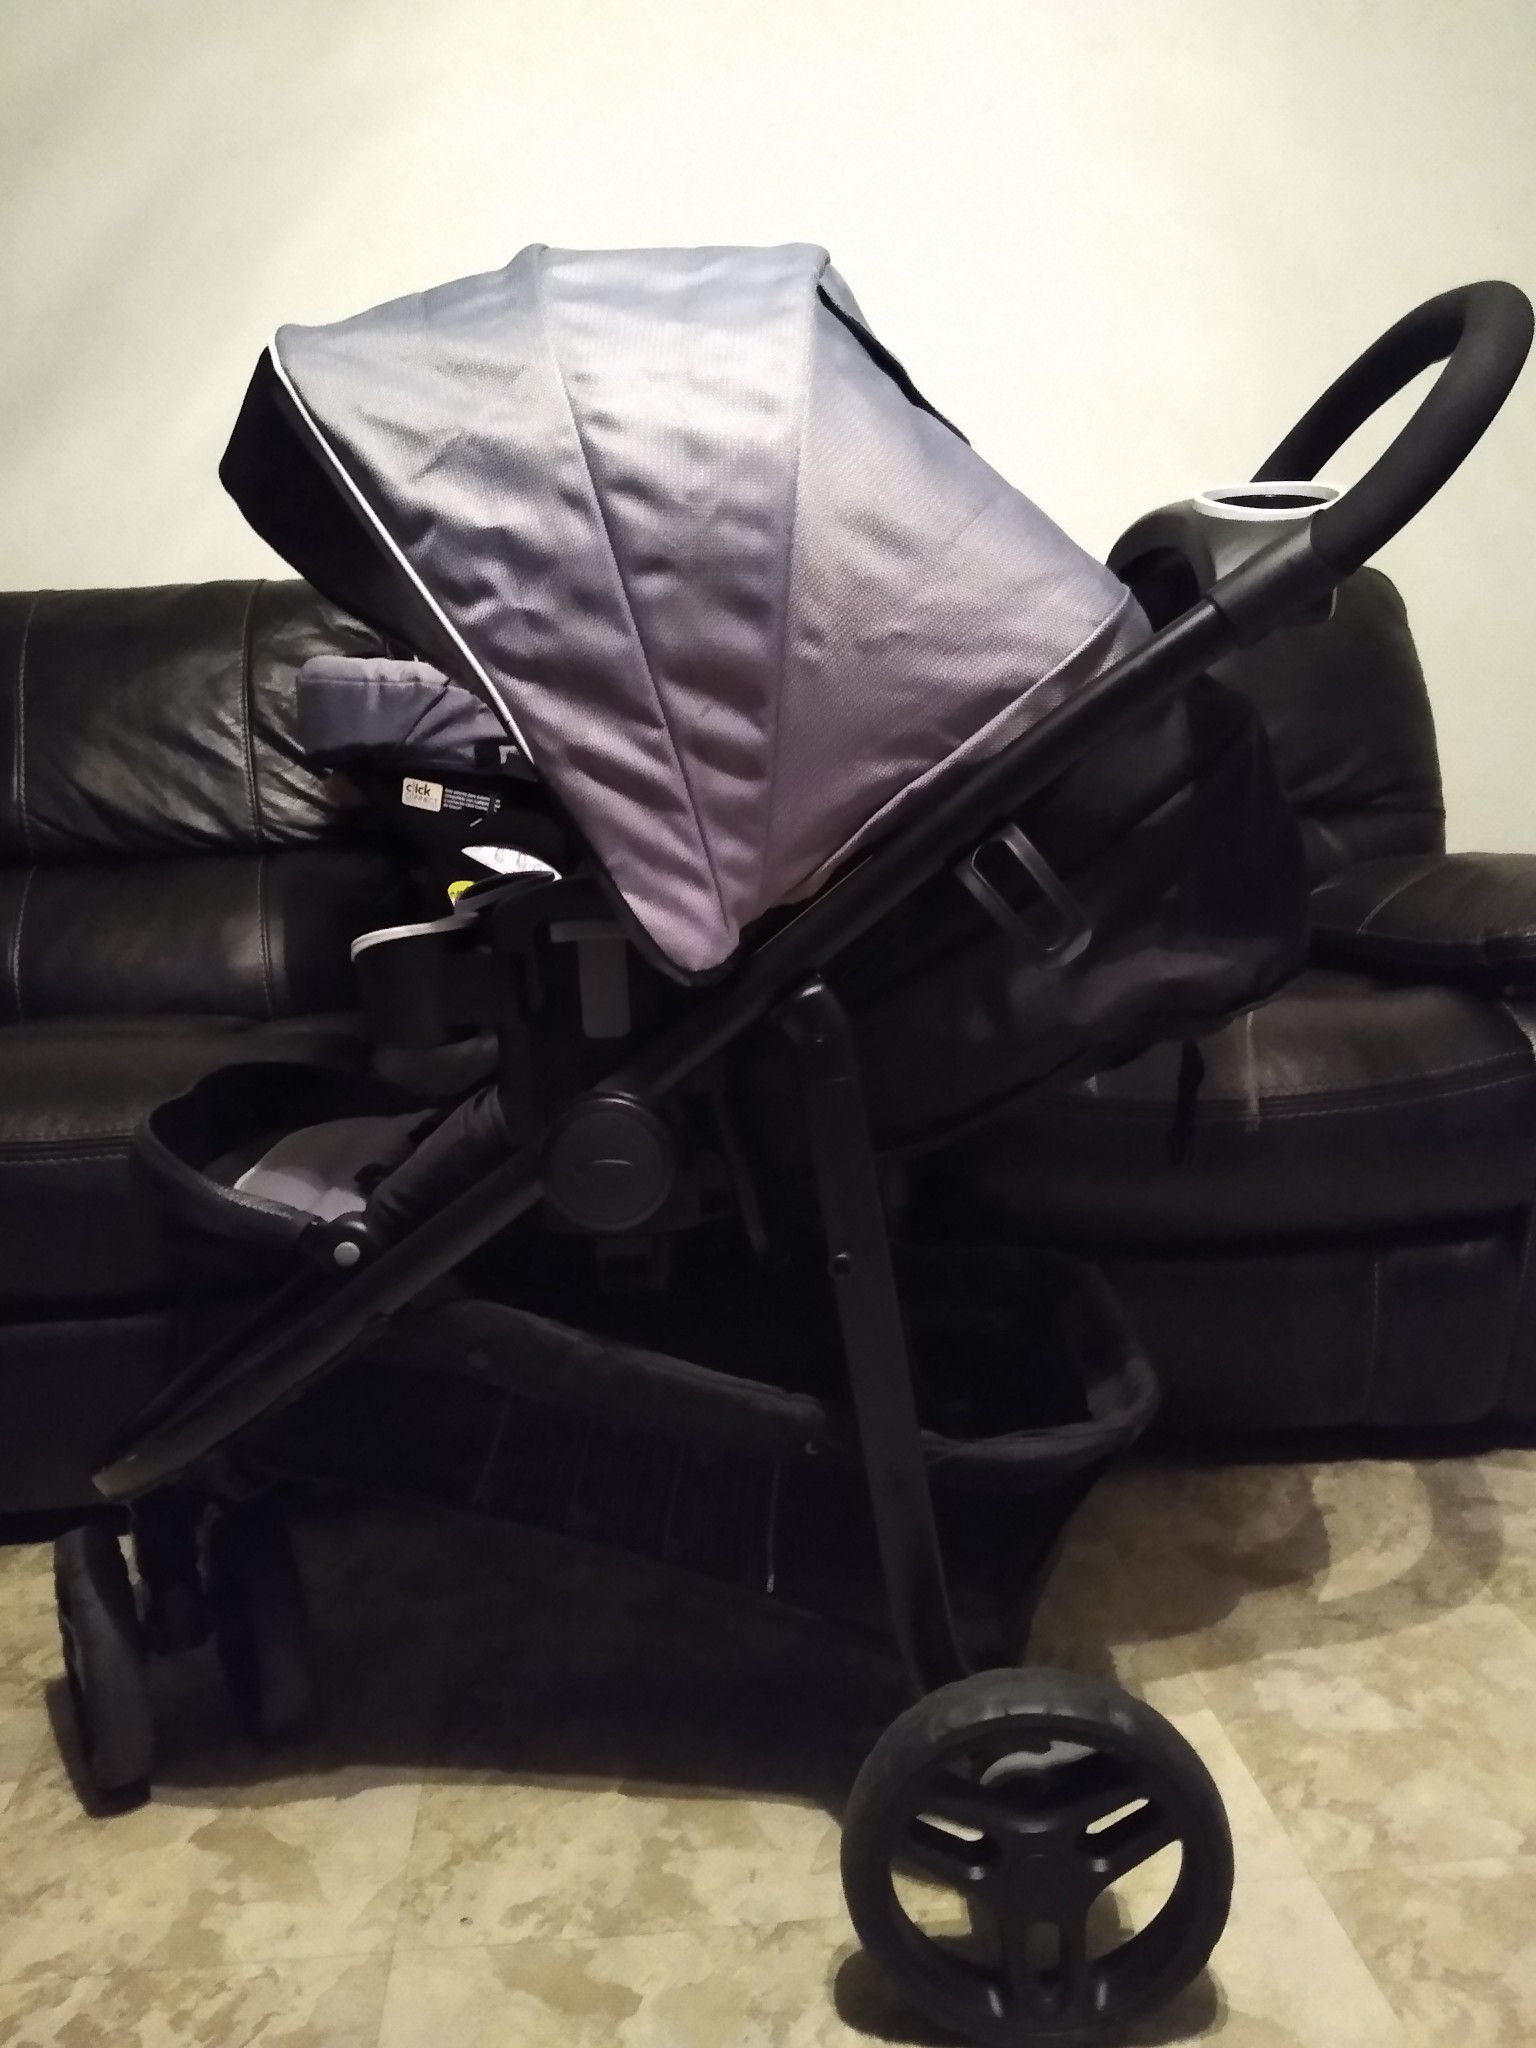 Graco traveling system